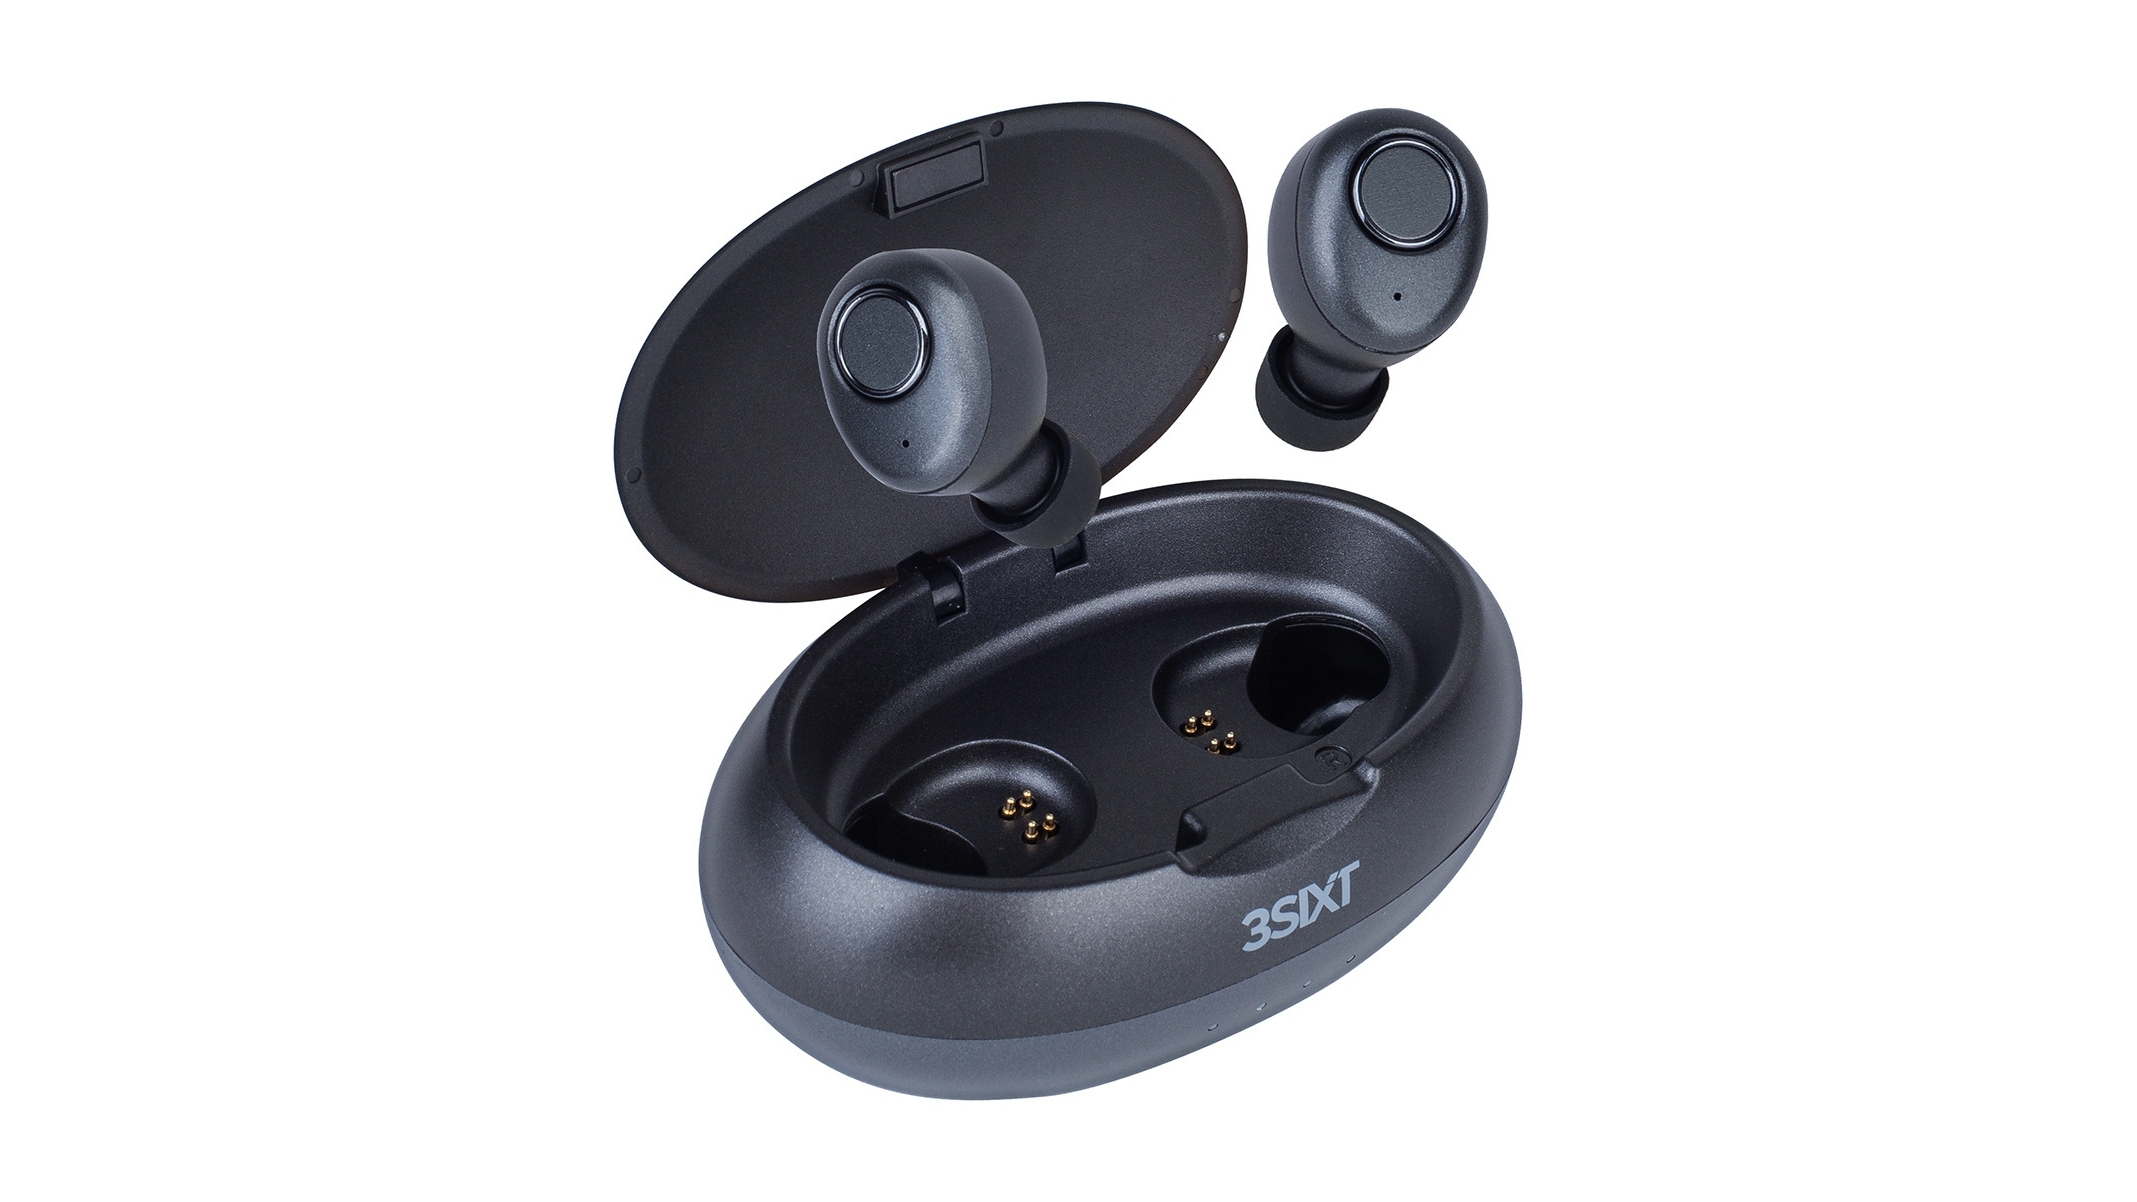 3sixt earbuds